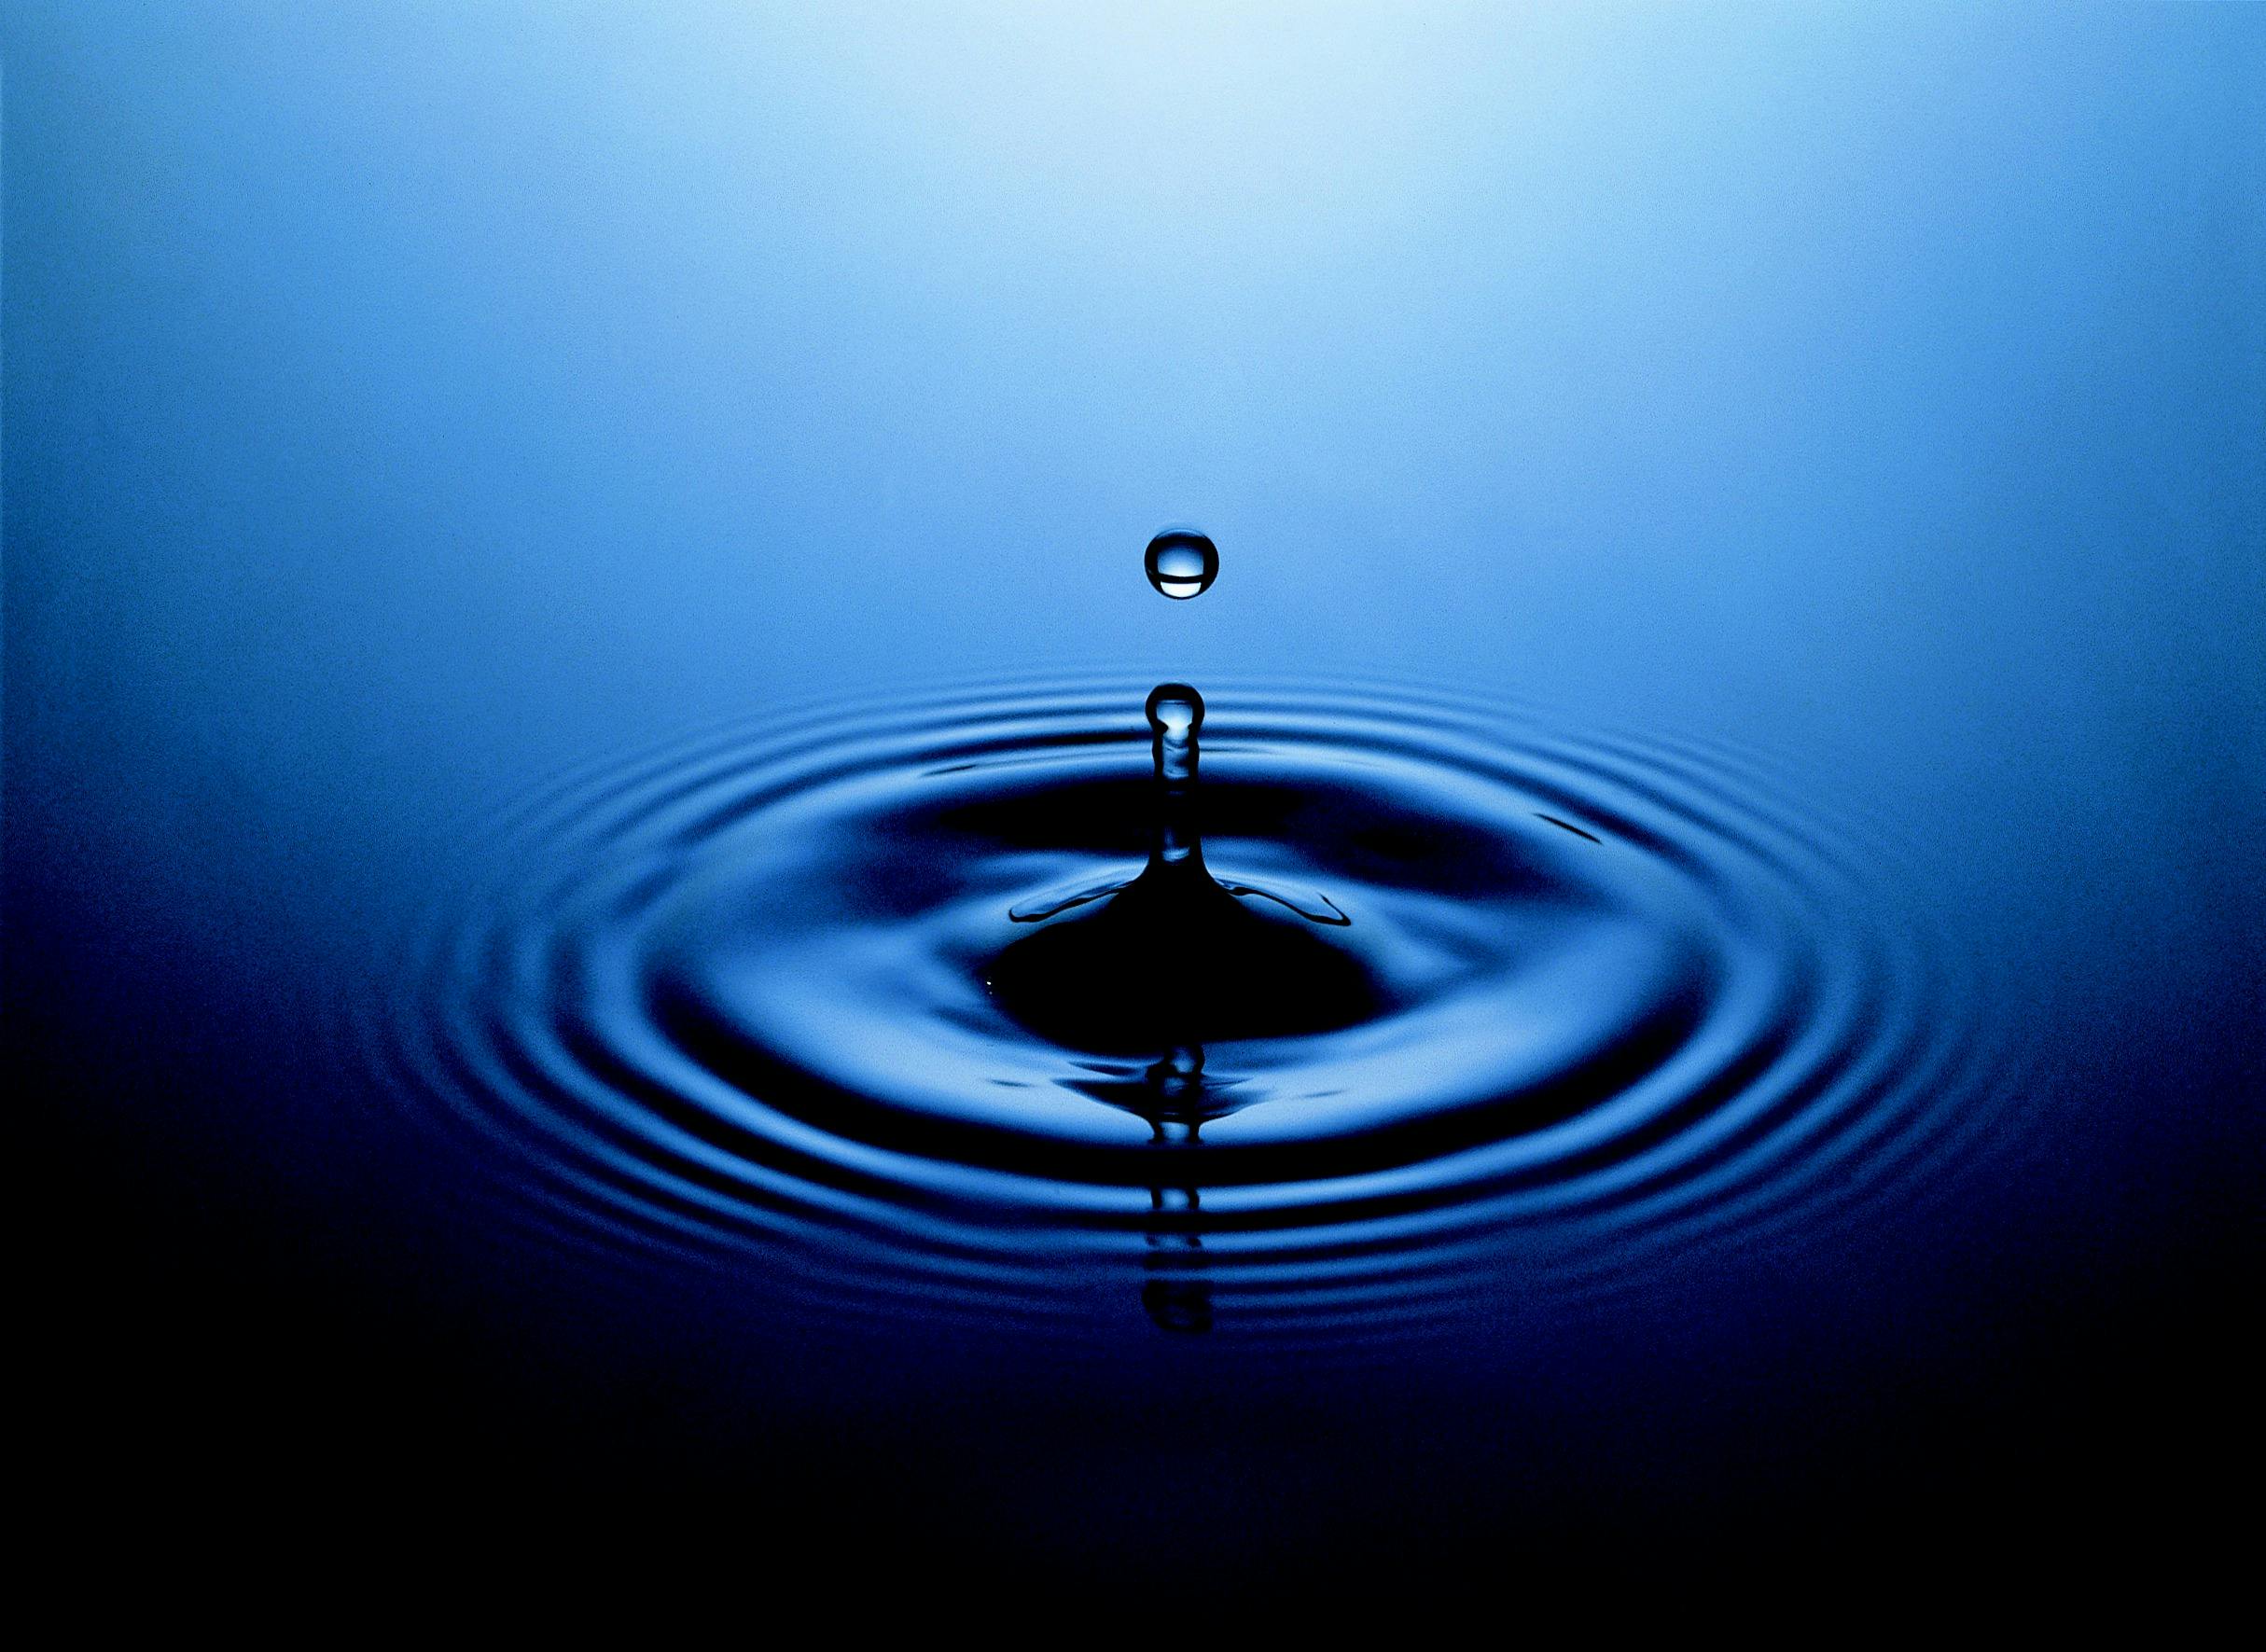 Ripple Photos, Download The BEST Free Ripple Stock Photos & HD Images